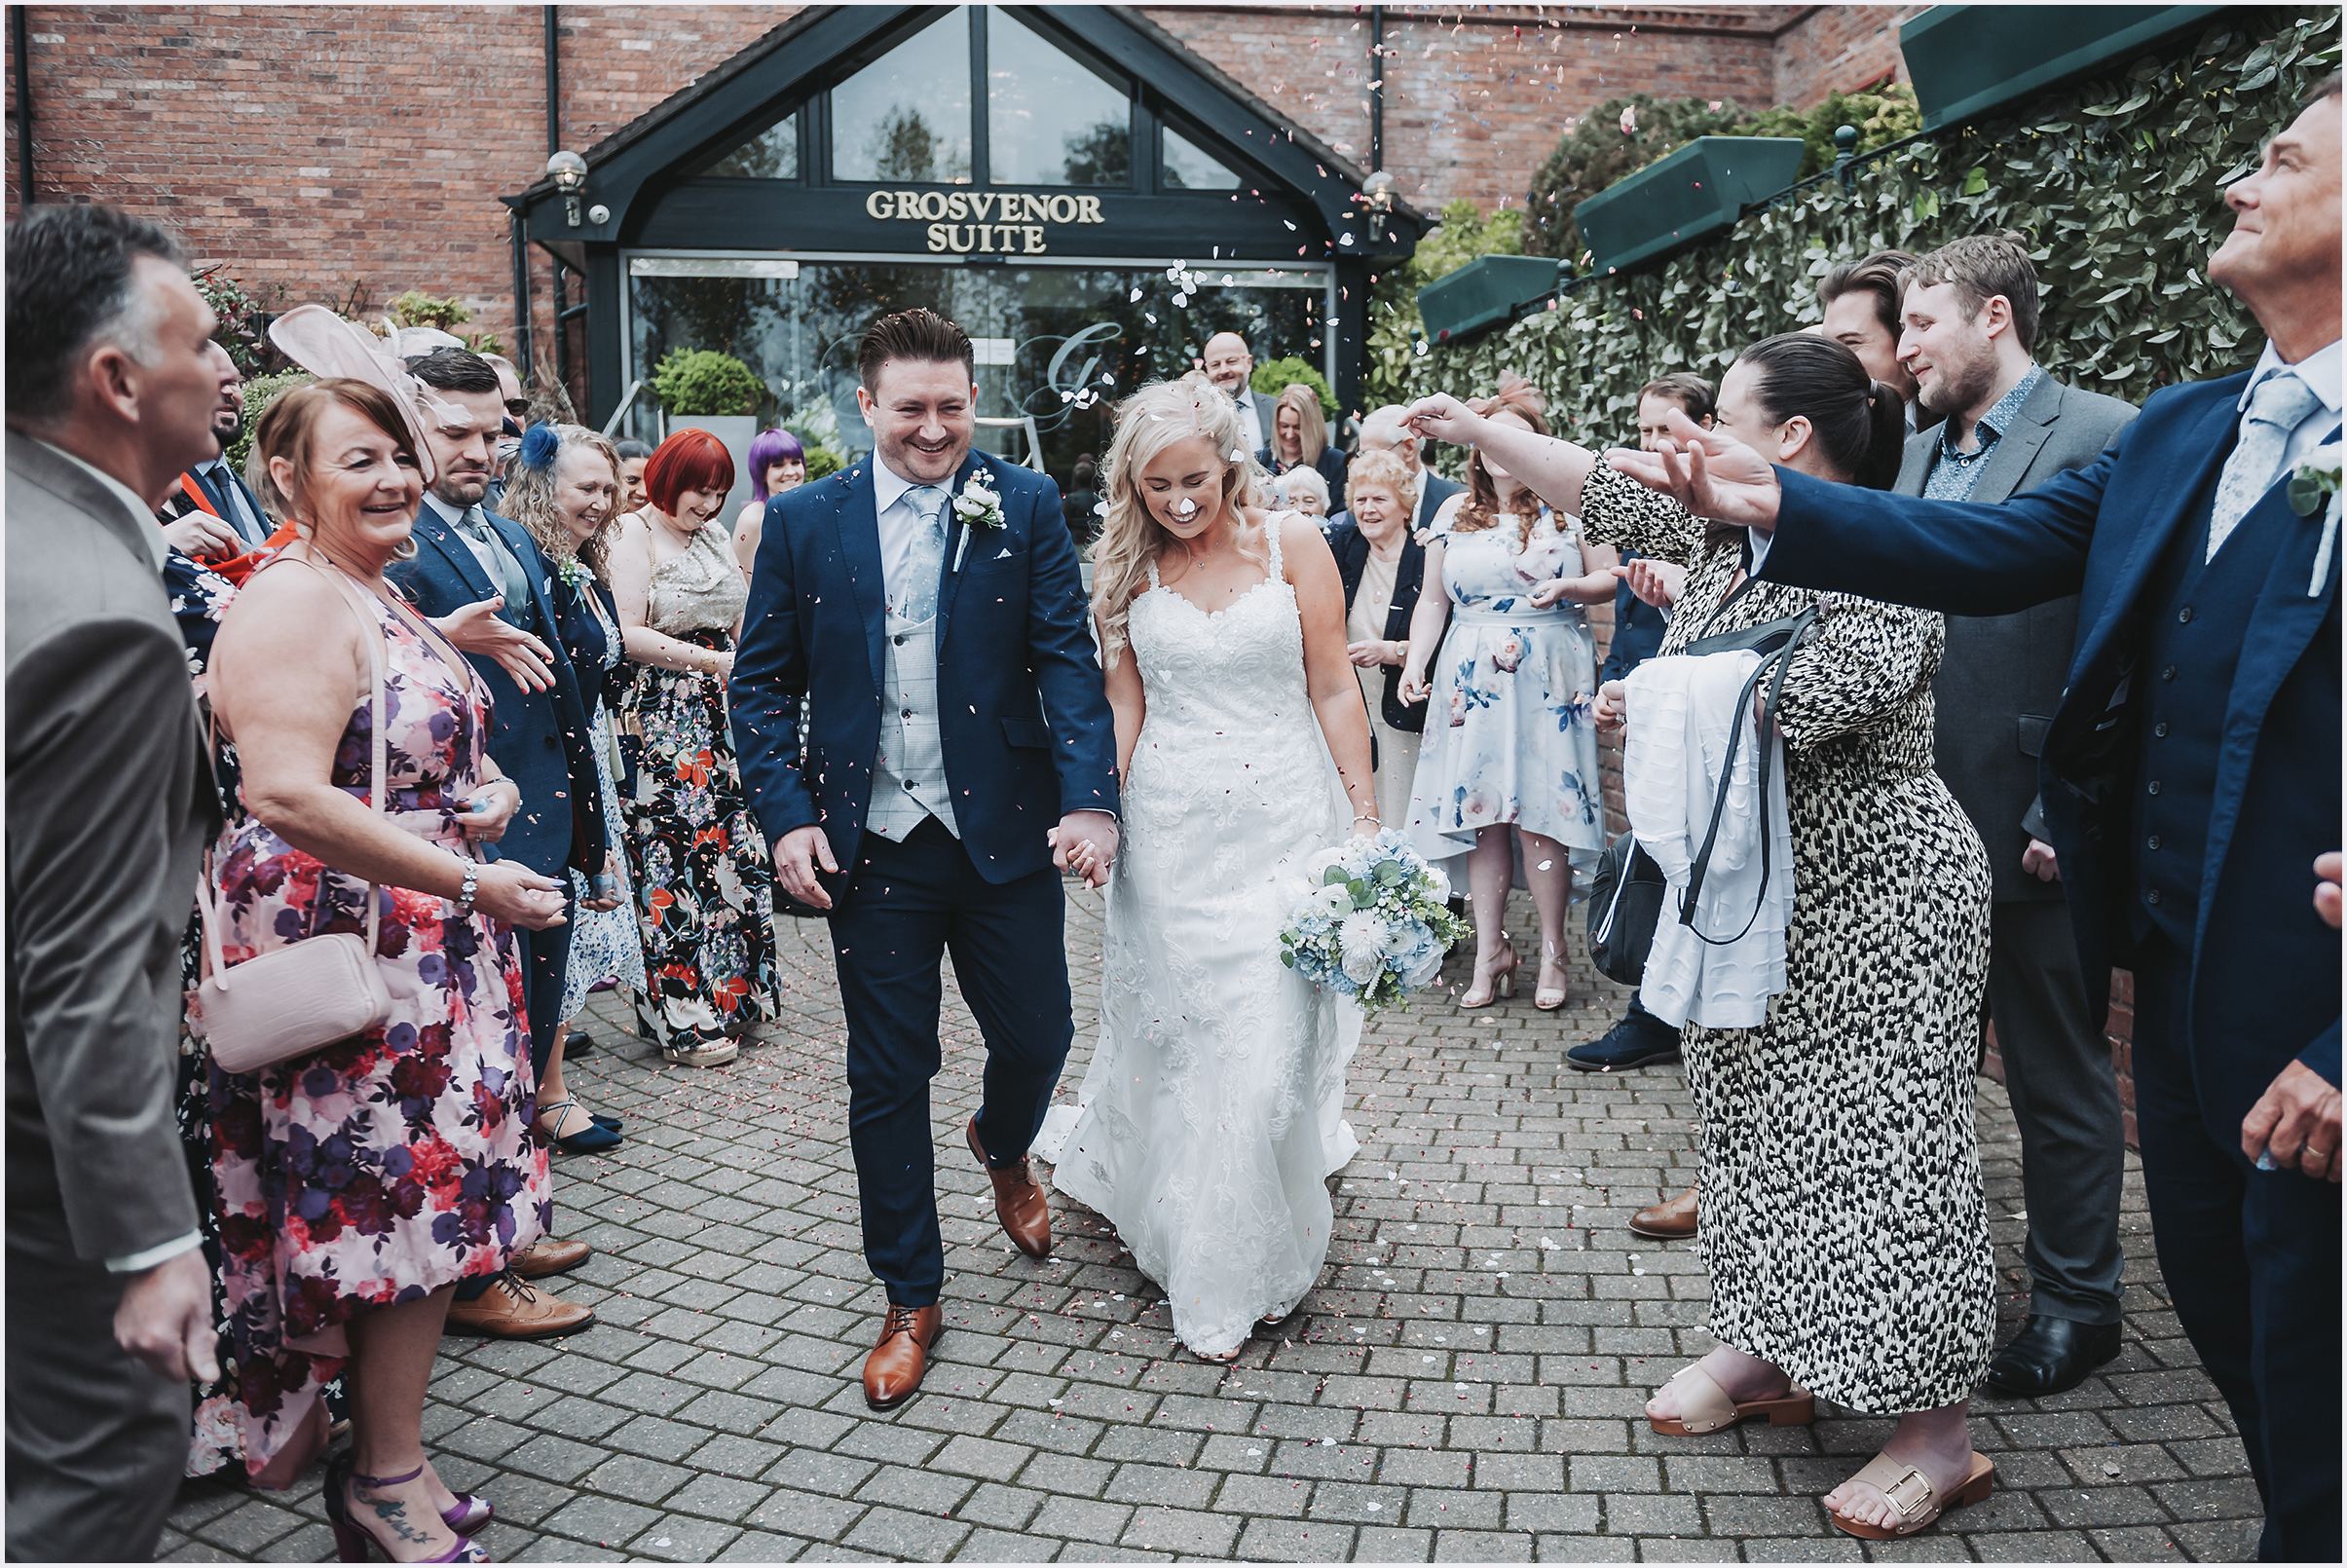 Guests throwing confetti at a newly married couple outside The Grosvenor Pulford Hotel and Spa.